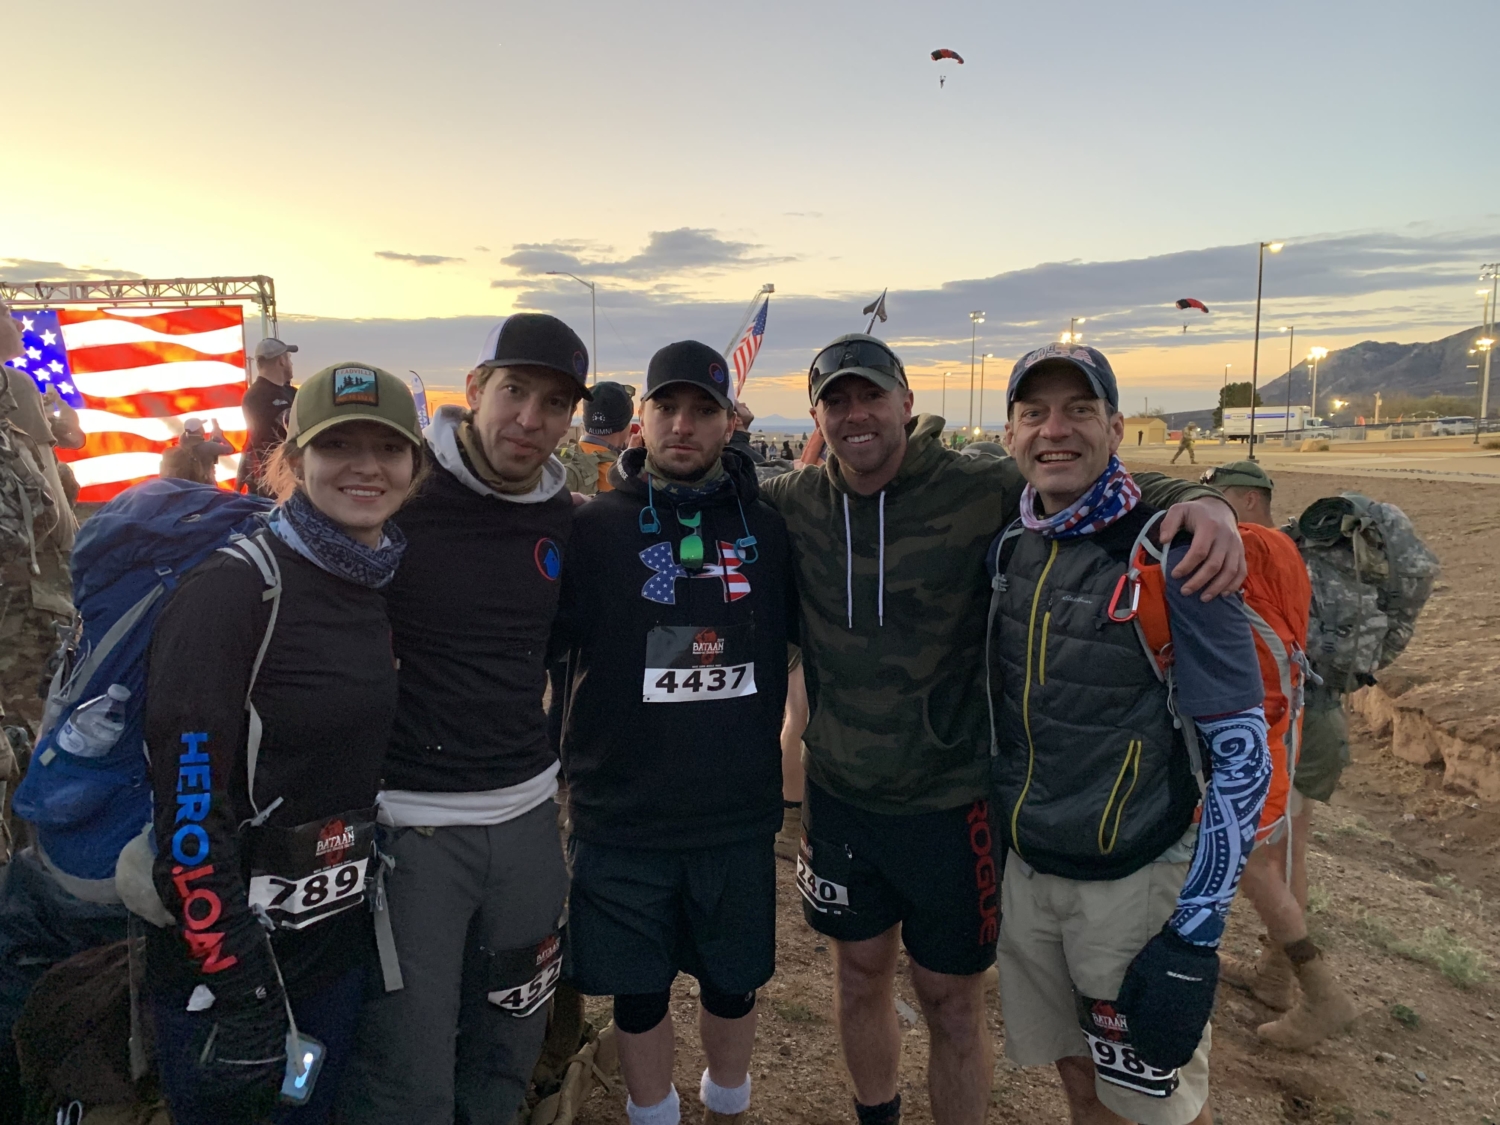 Nick Bare at the Bataan Memorial Death March